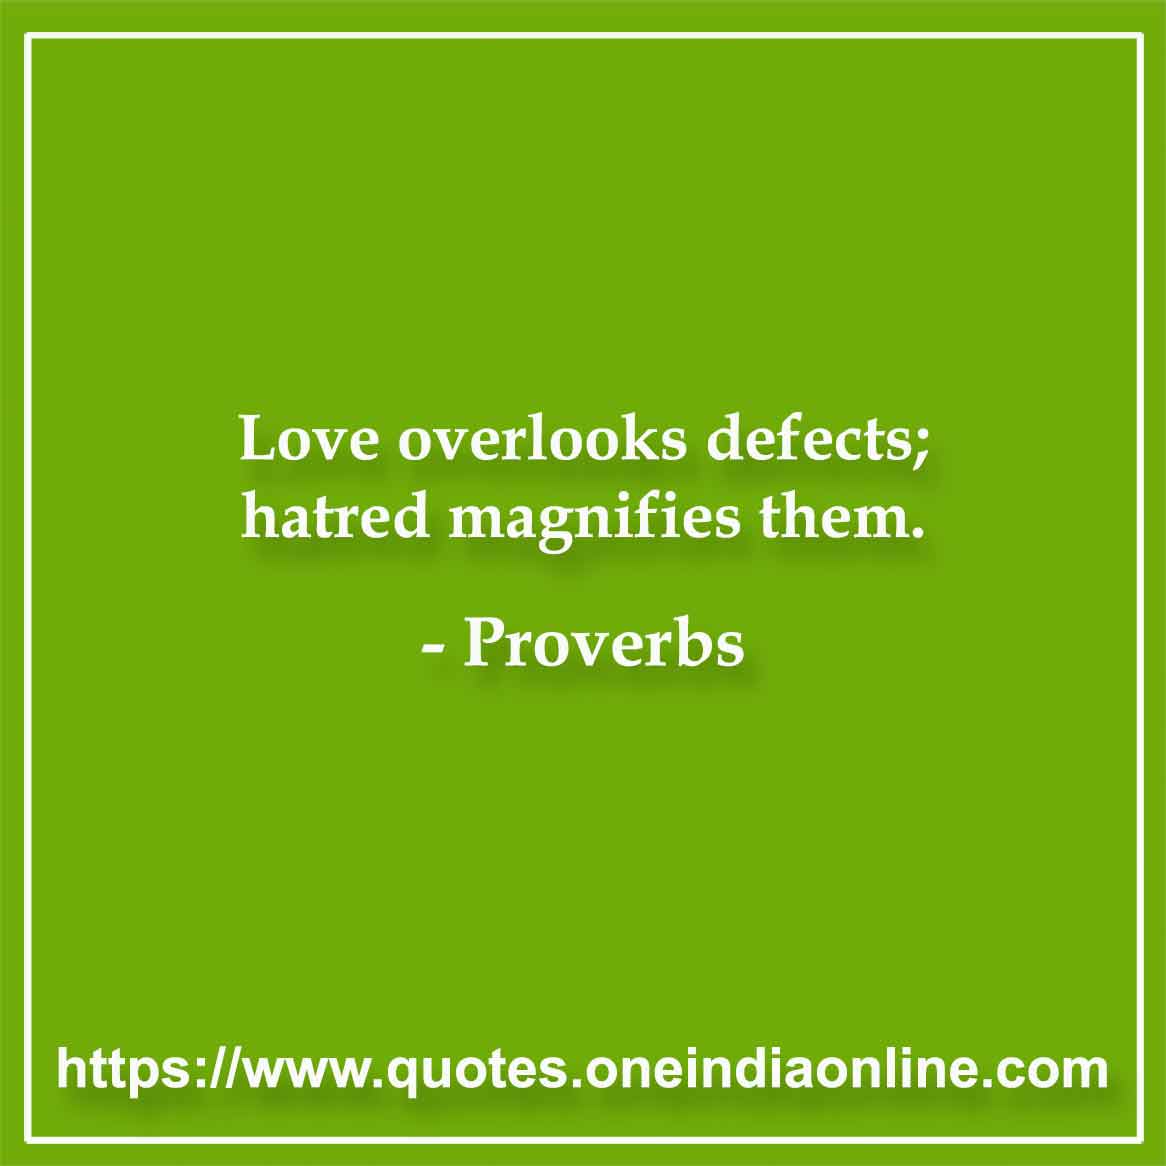 Love overlooks defects; hatred magnifies them.